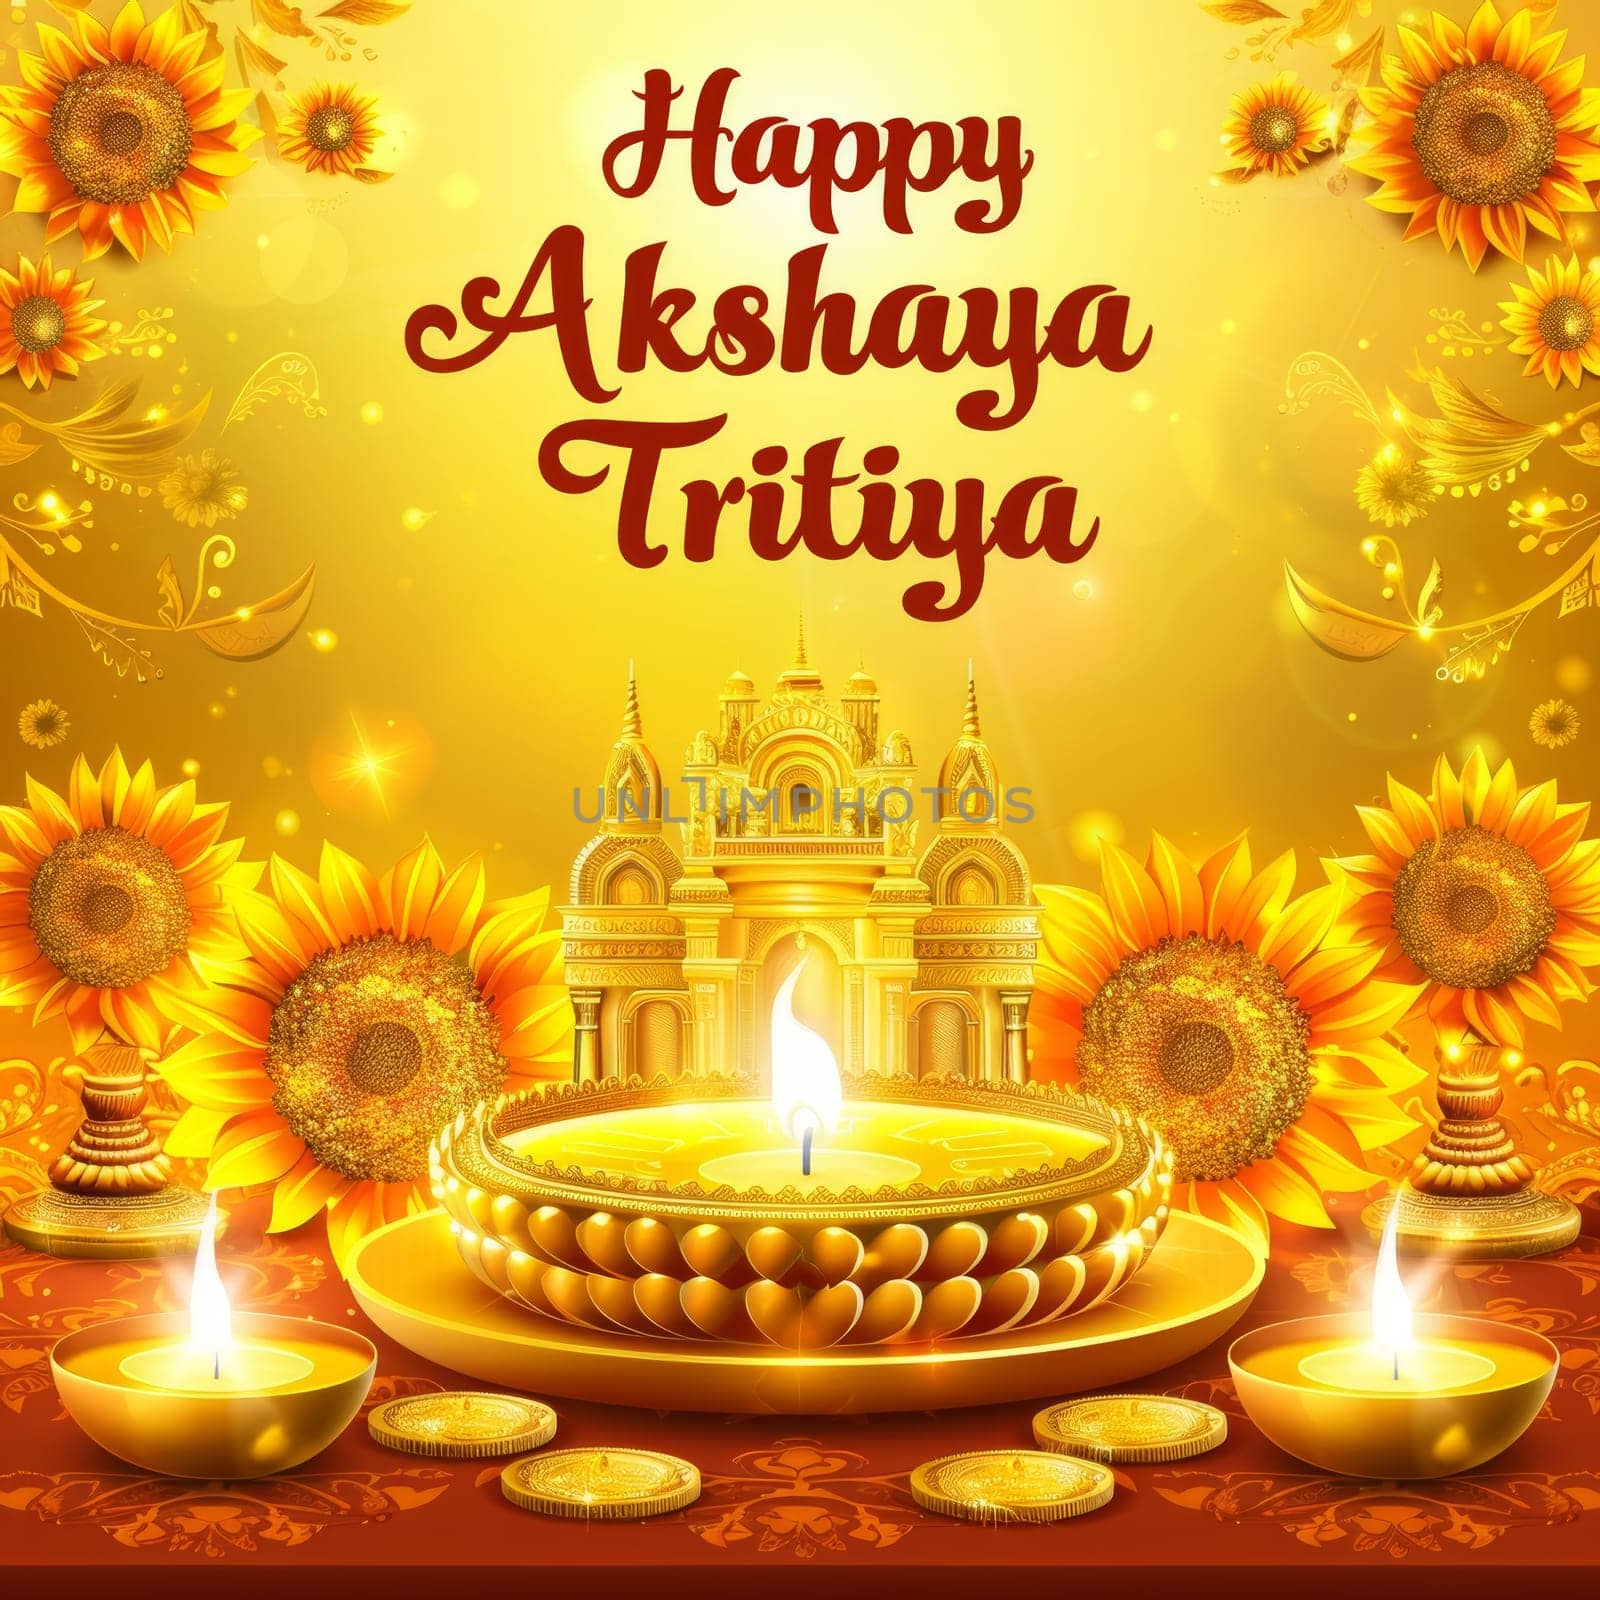 Festive graphic for Akshaya Tritiya with a golden temple, oil lamps, sunflowers, and glitters on a yellow background